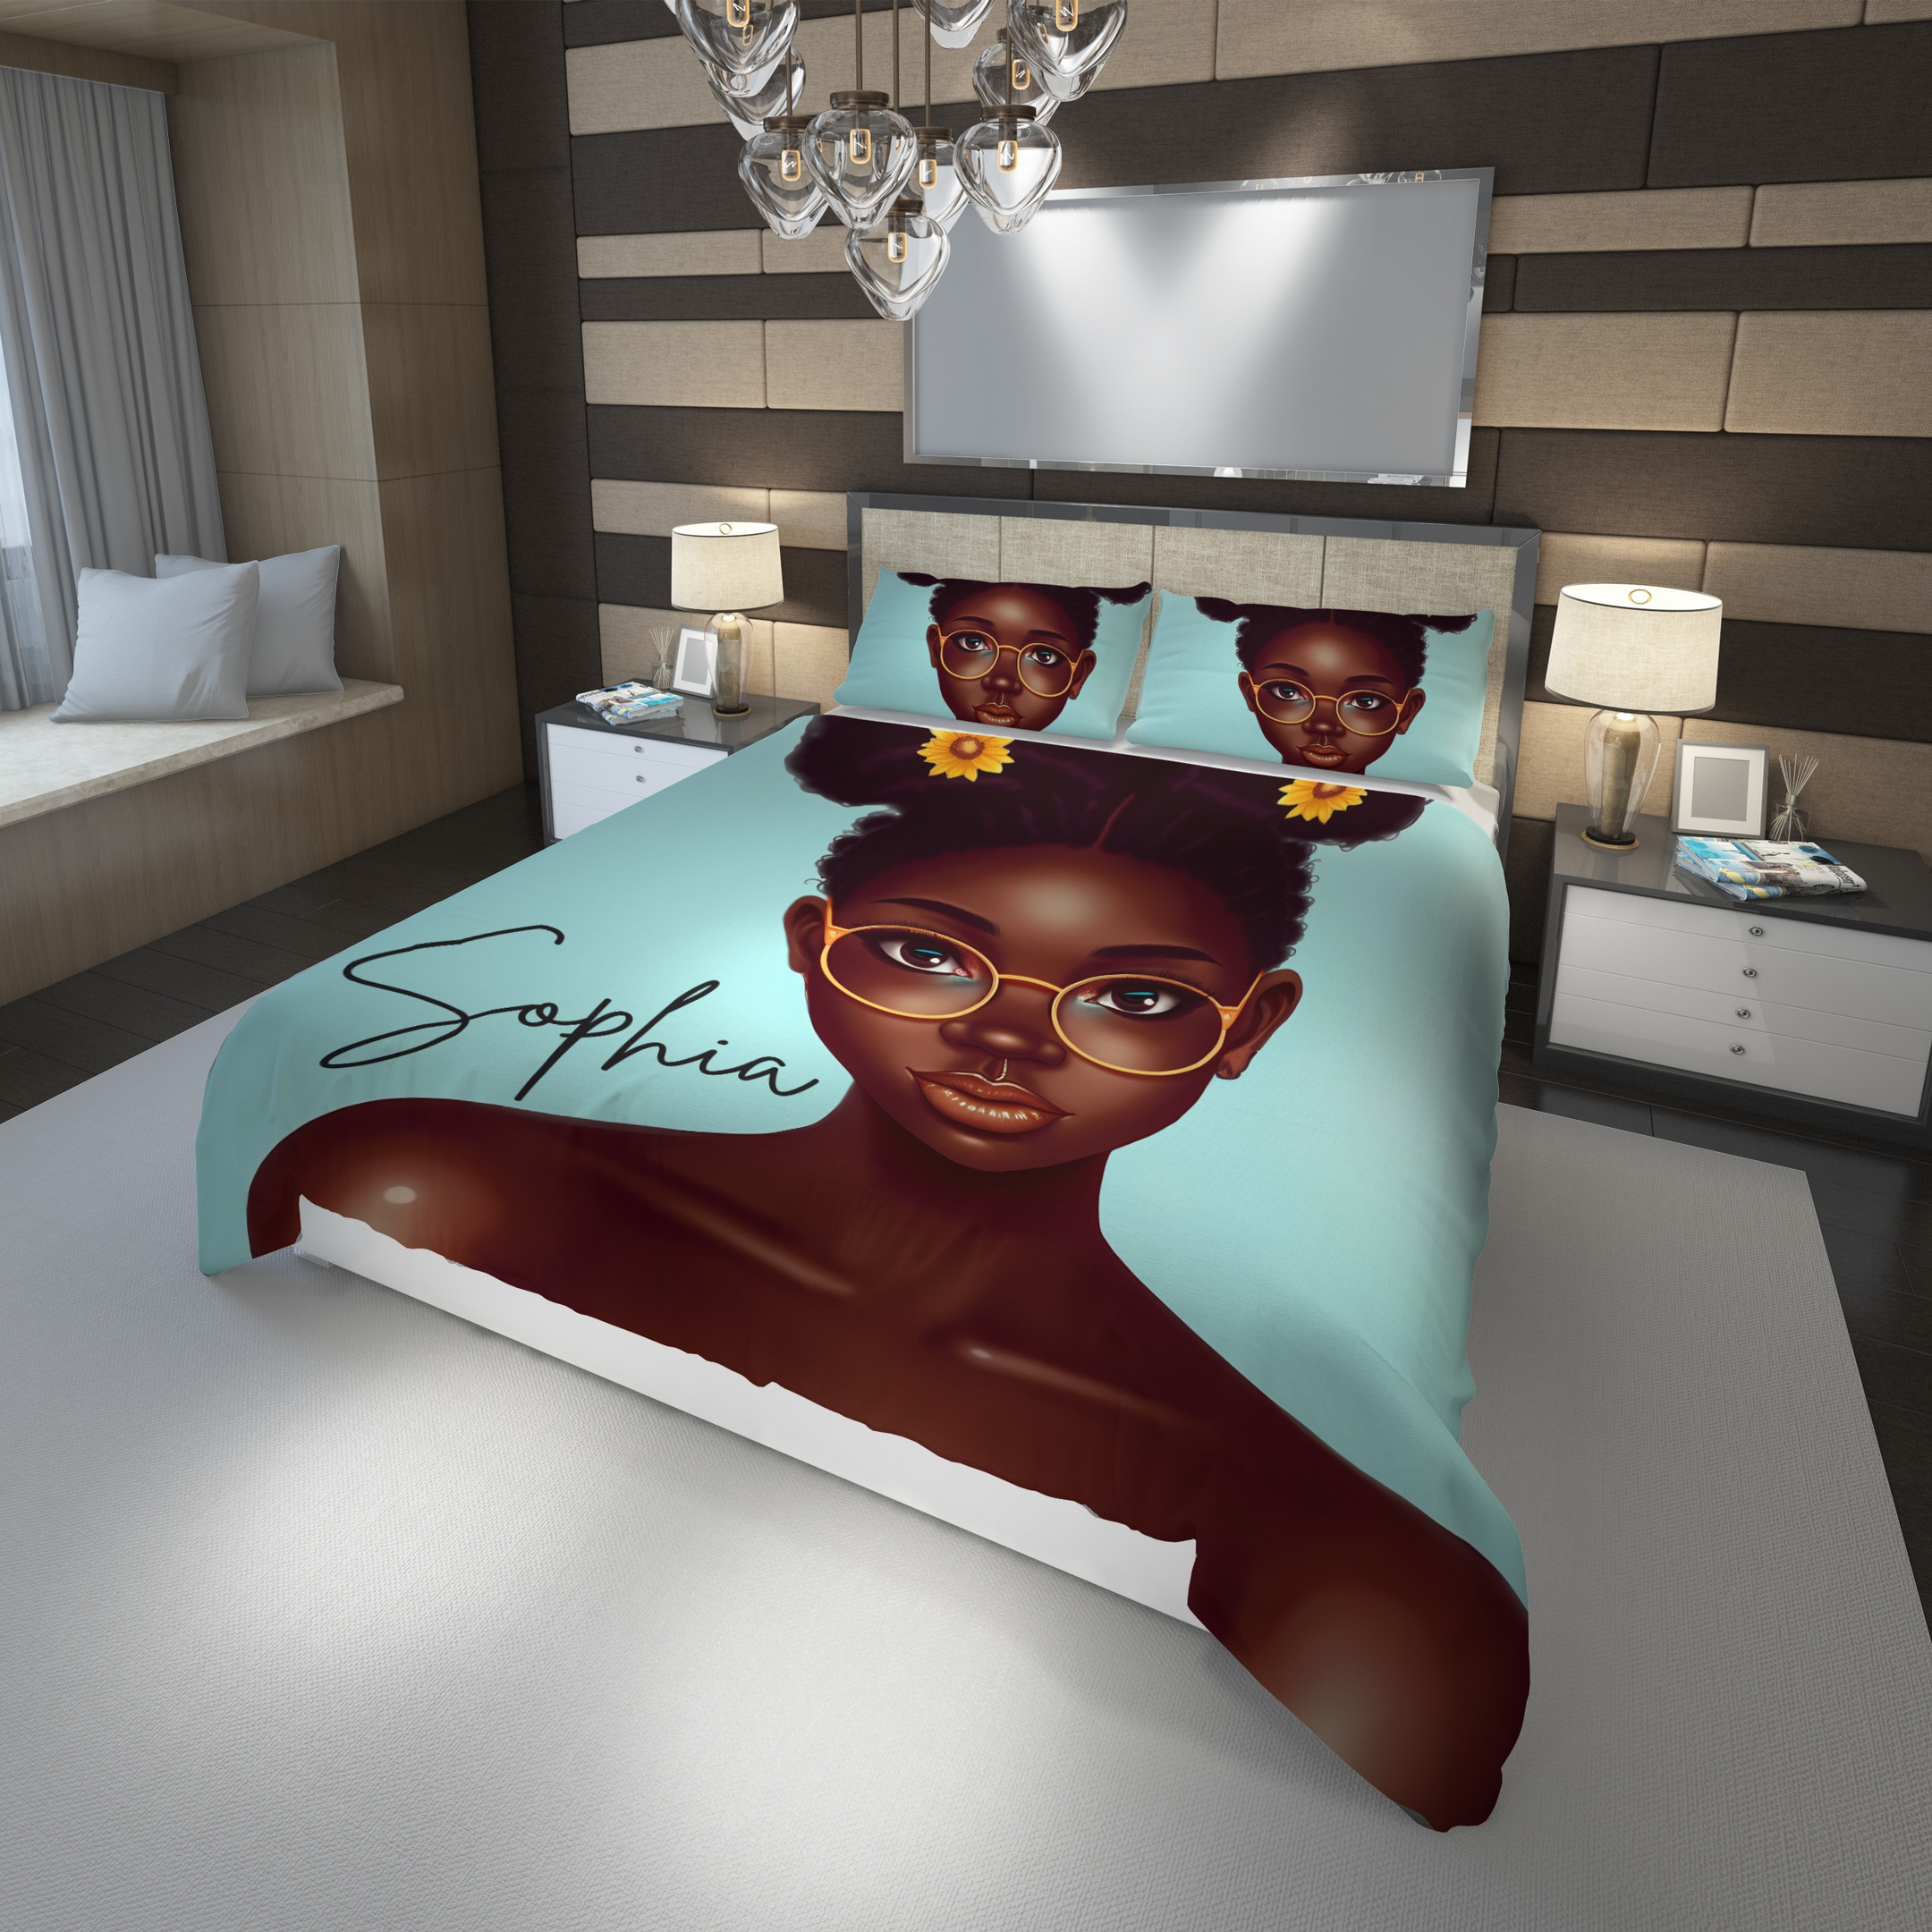 Personalized Black Girl With Glasses And Sunflowers On Her Hair Duvet Cover Bedding Set